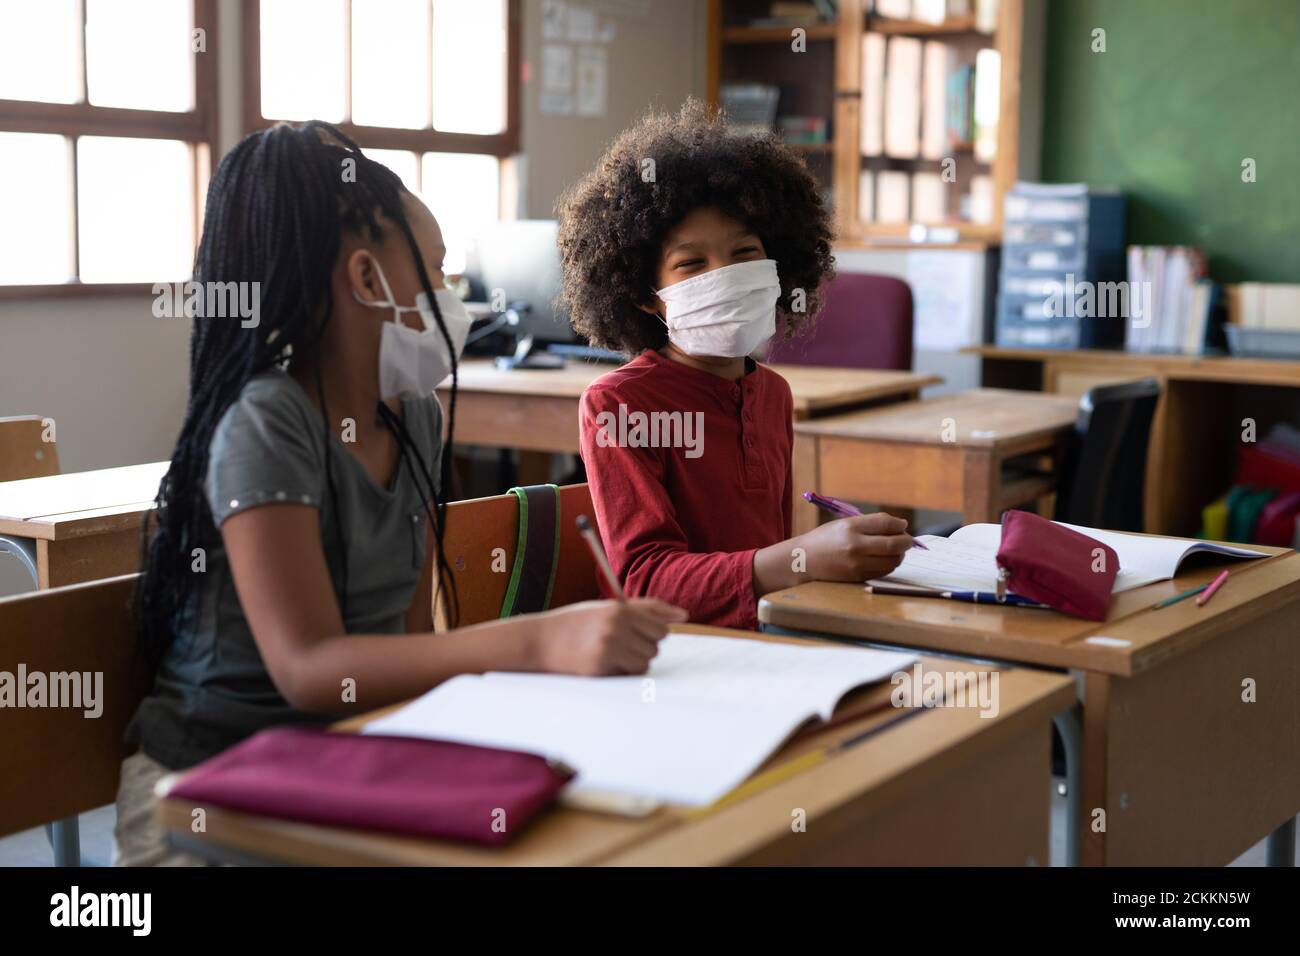 Boy and Girl wearing face masks talking to each other while sitting on their desk at school Stock Photo